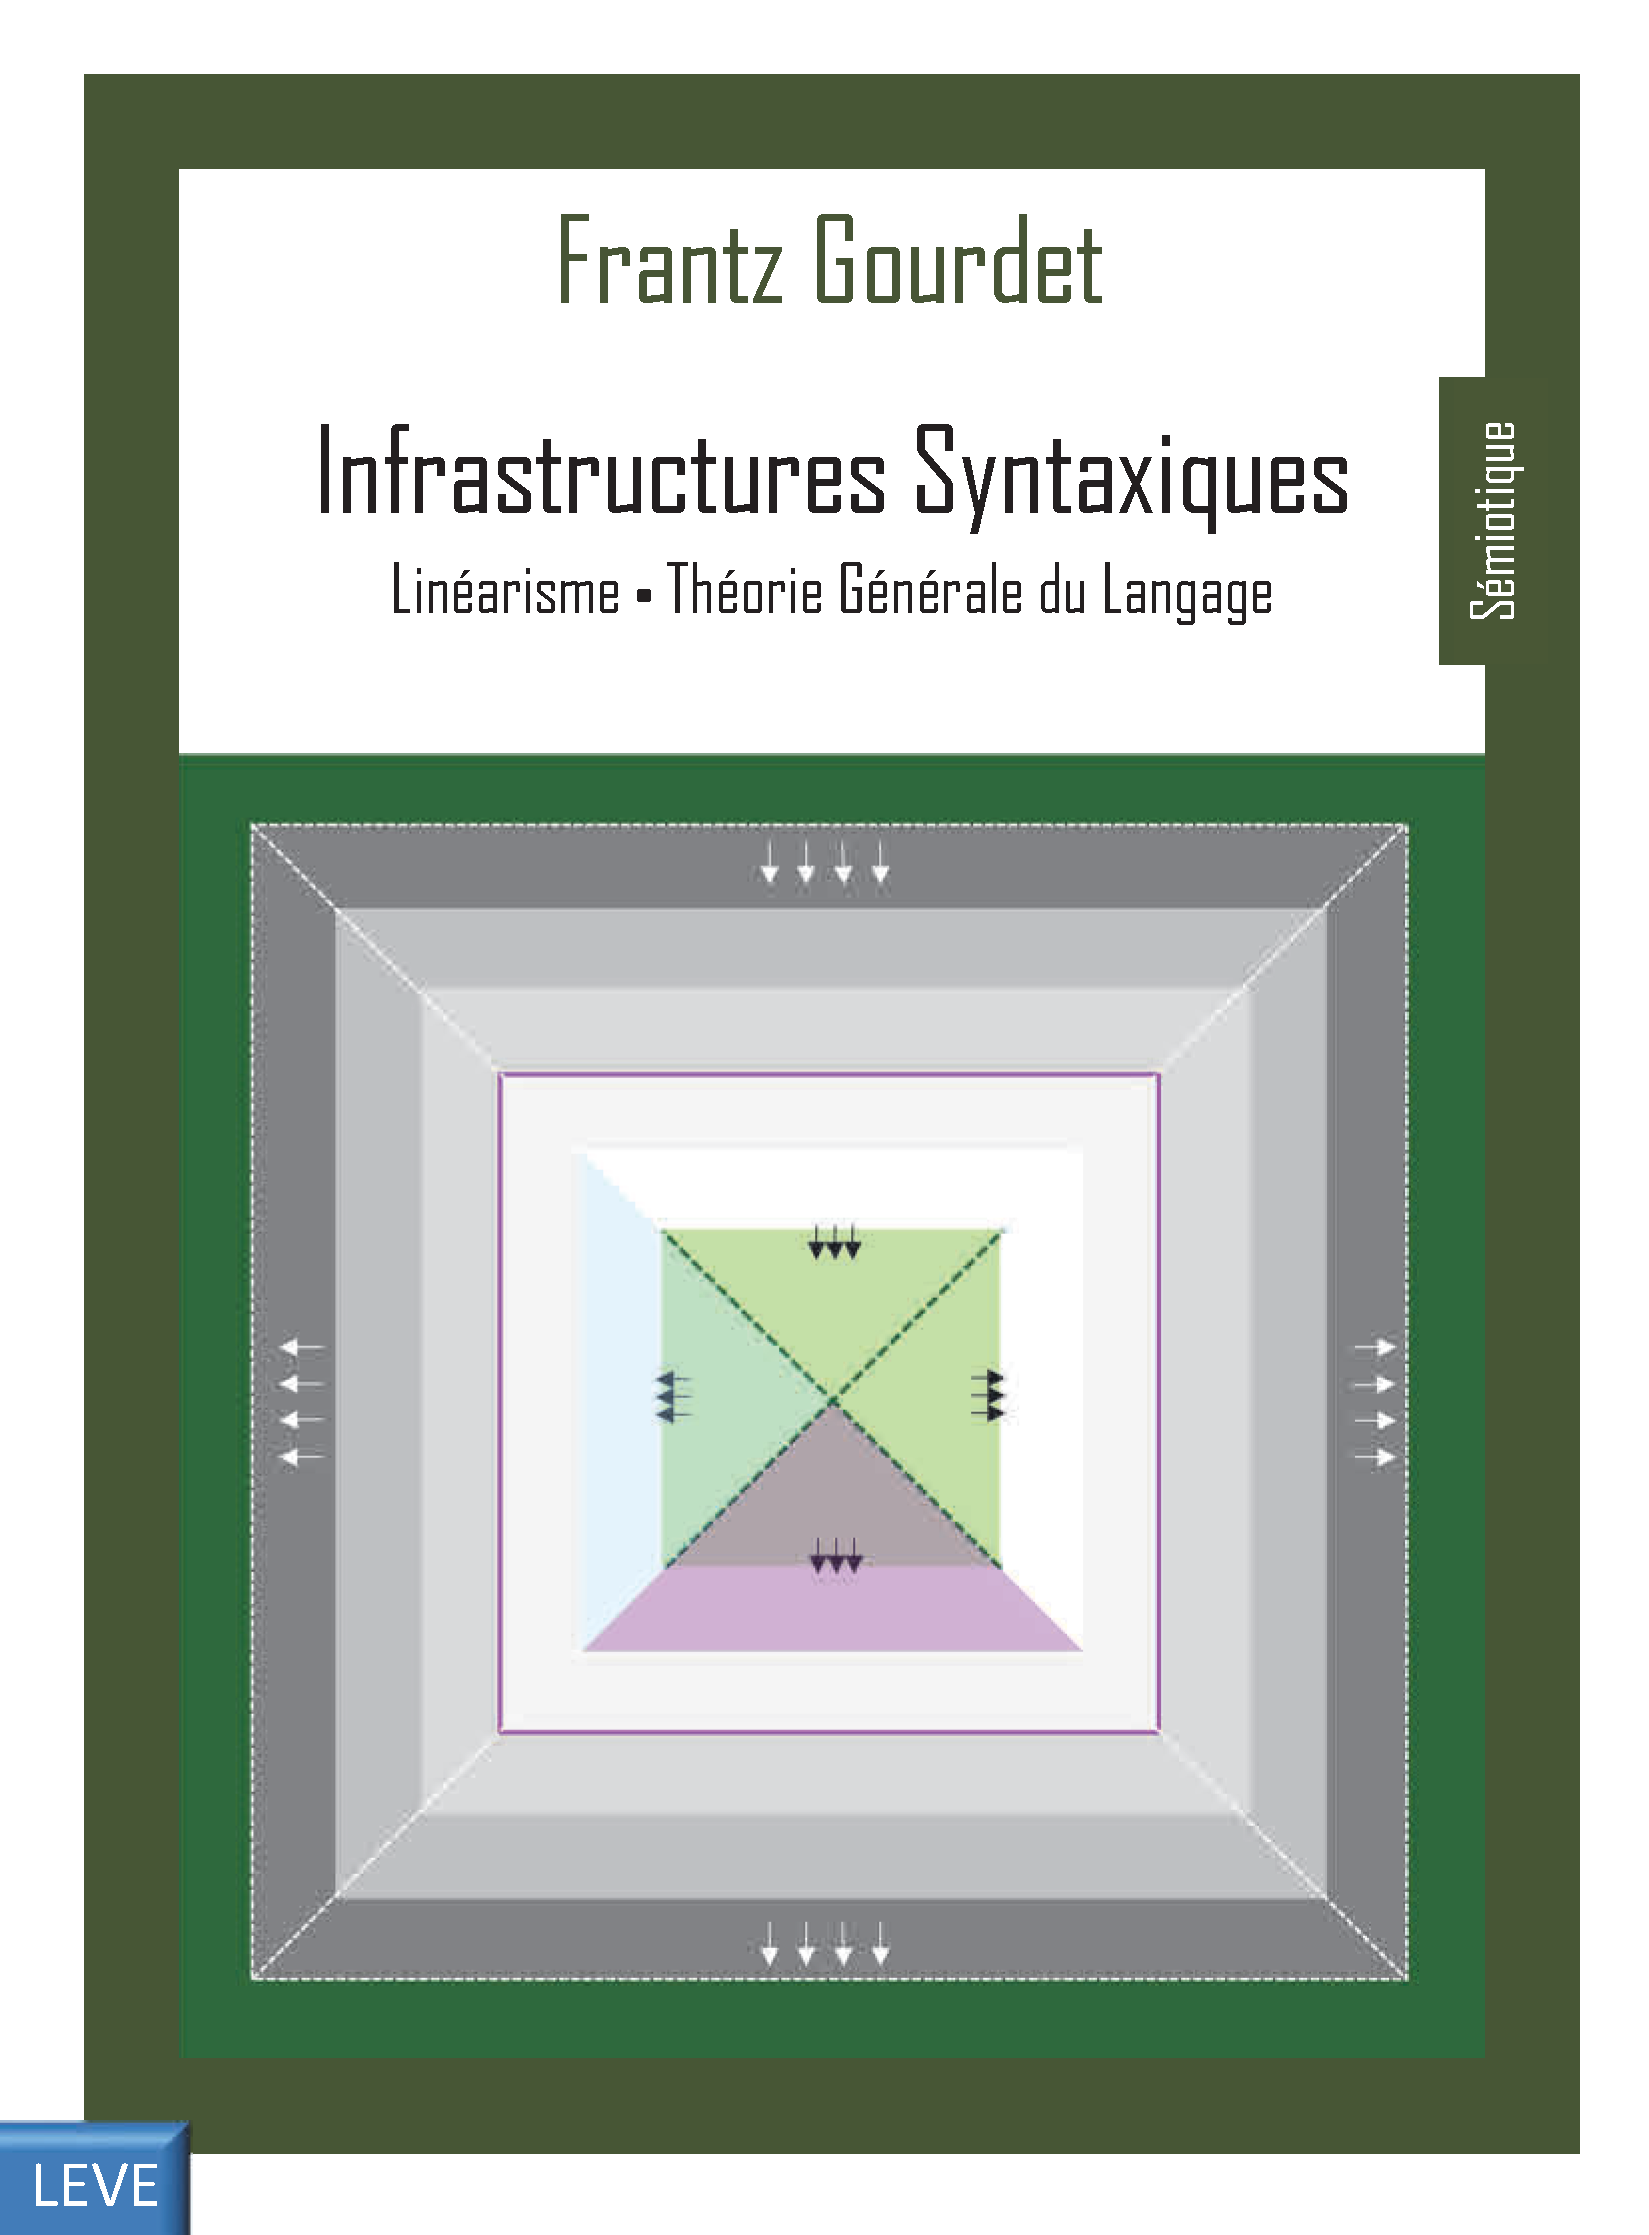 Infrastructures Syntaxiques